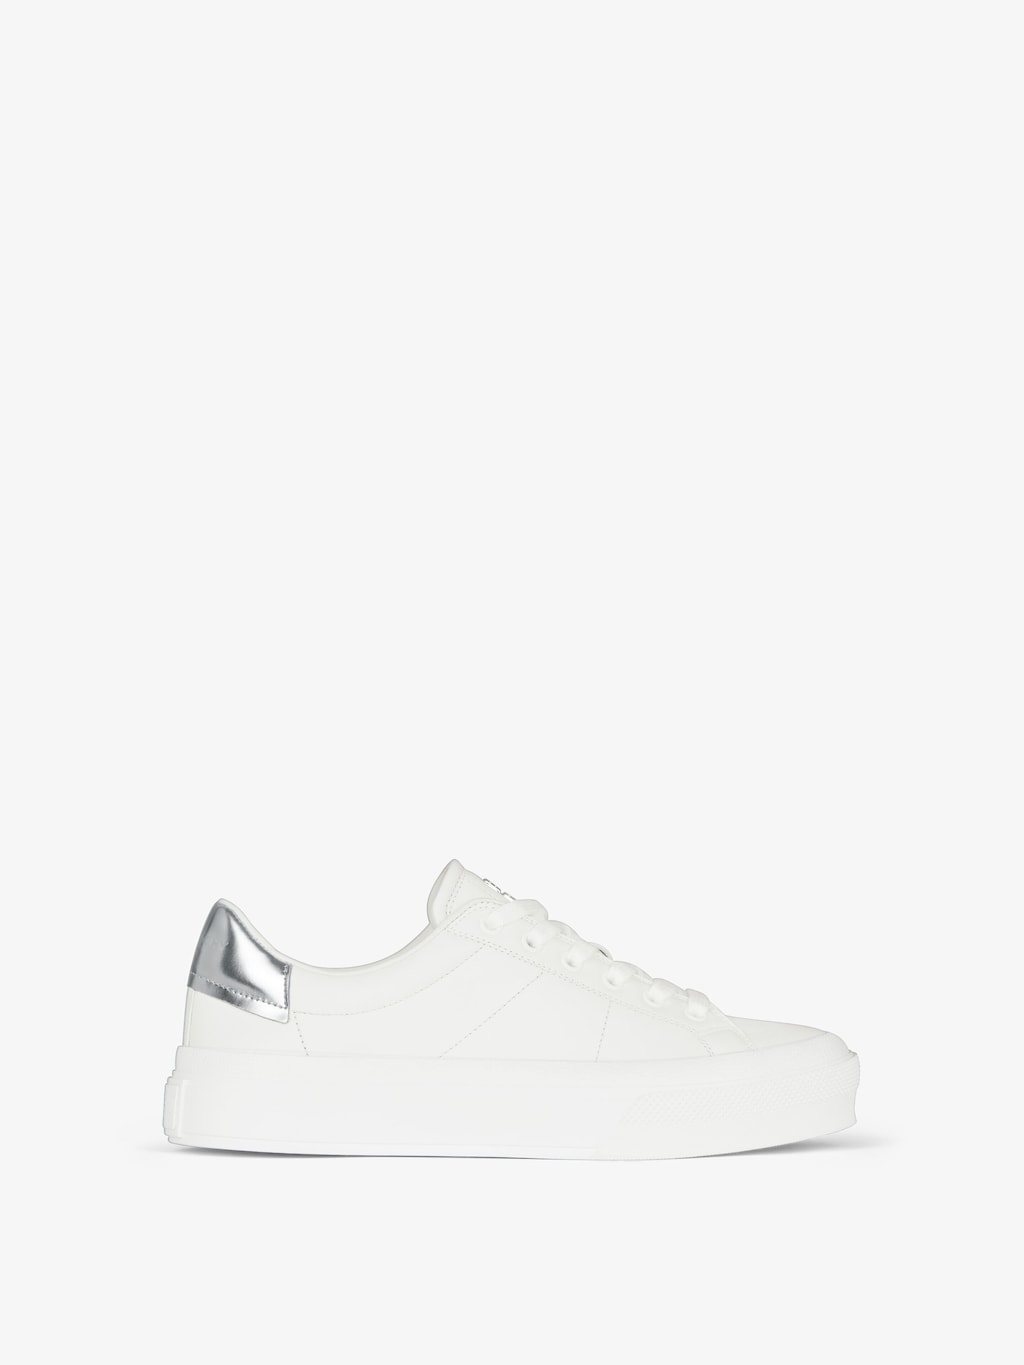 givenchy.com | City sneakers in leather